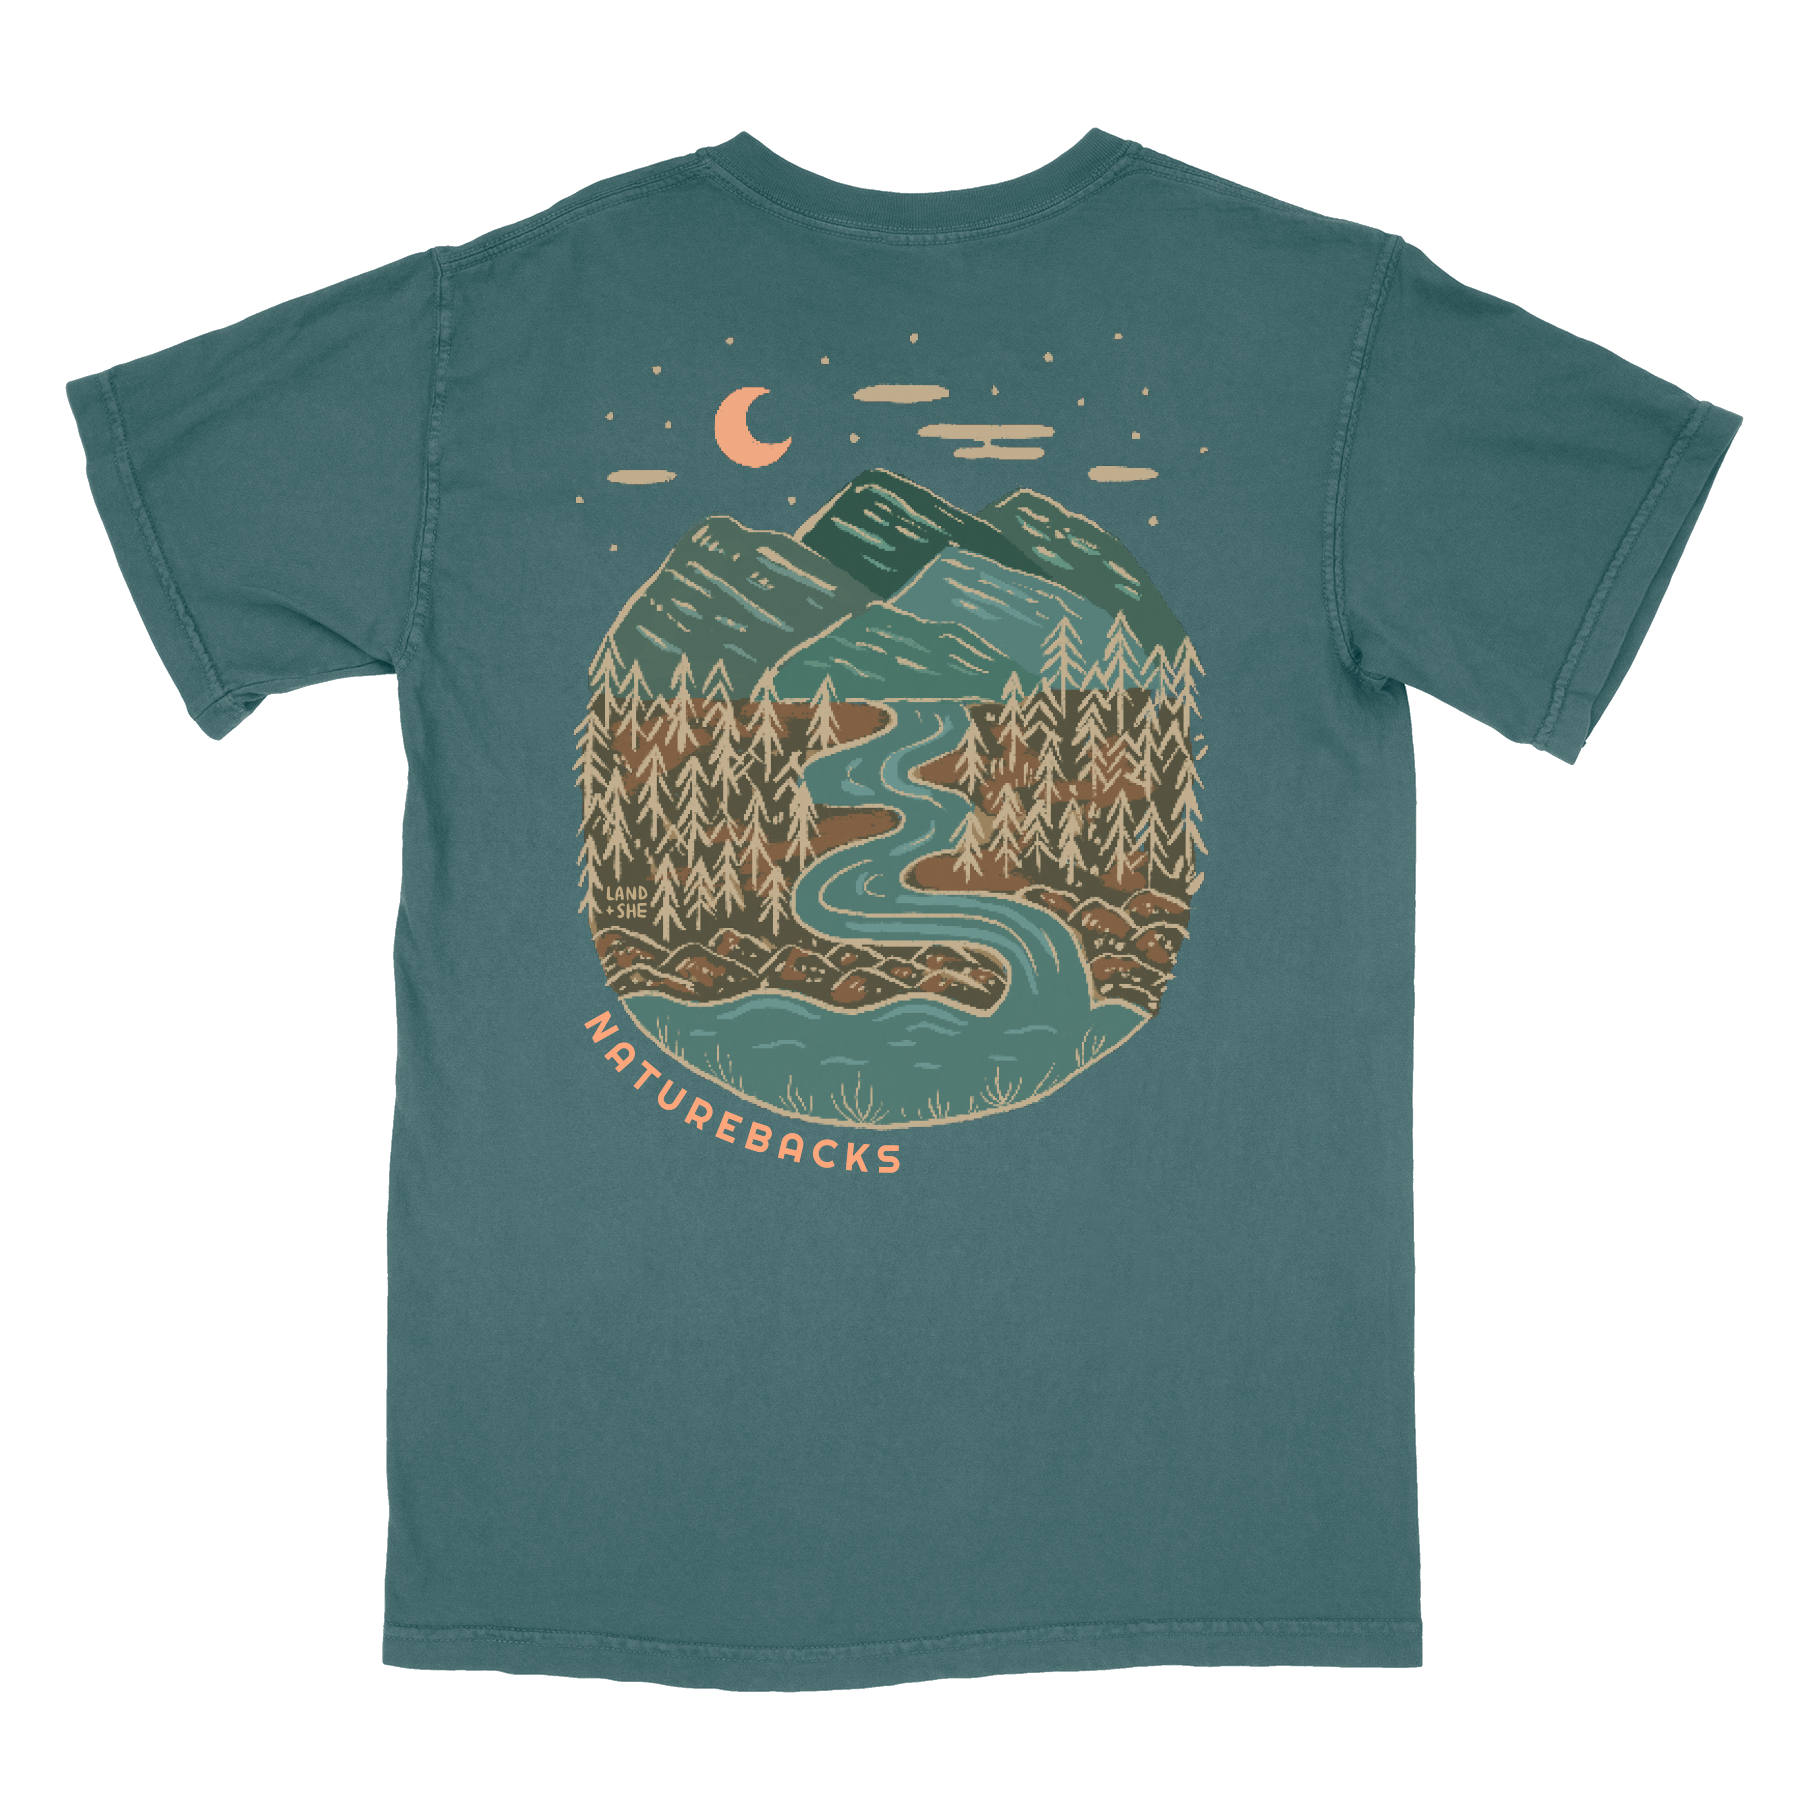 Nature Backs Comfort Colors Evergeen Spruce Short Sleeve T-Shirt | Nature-Inspired Design on Ultra-Soft Fabric